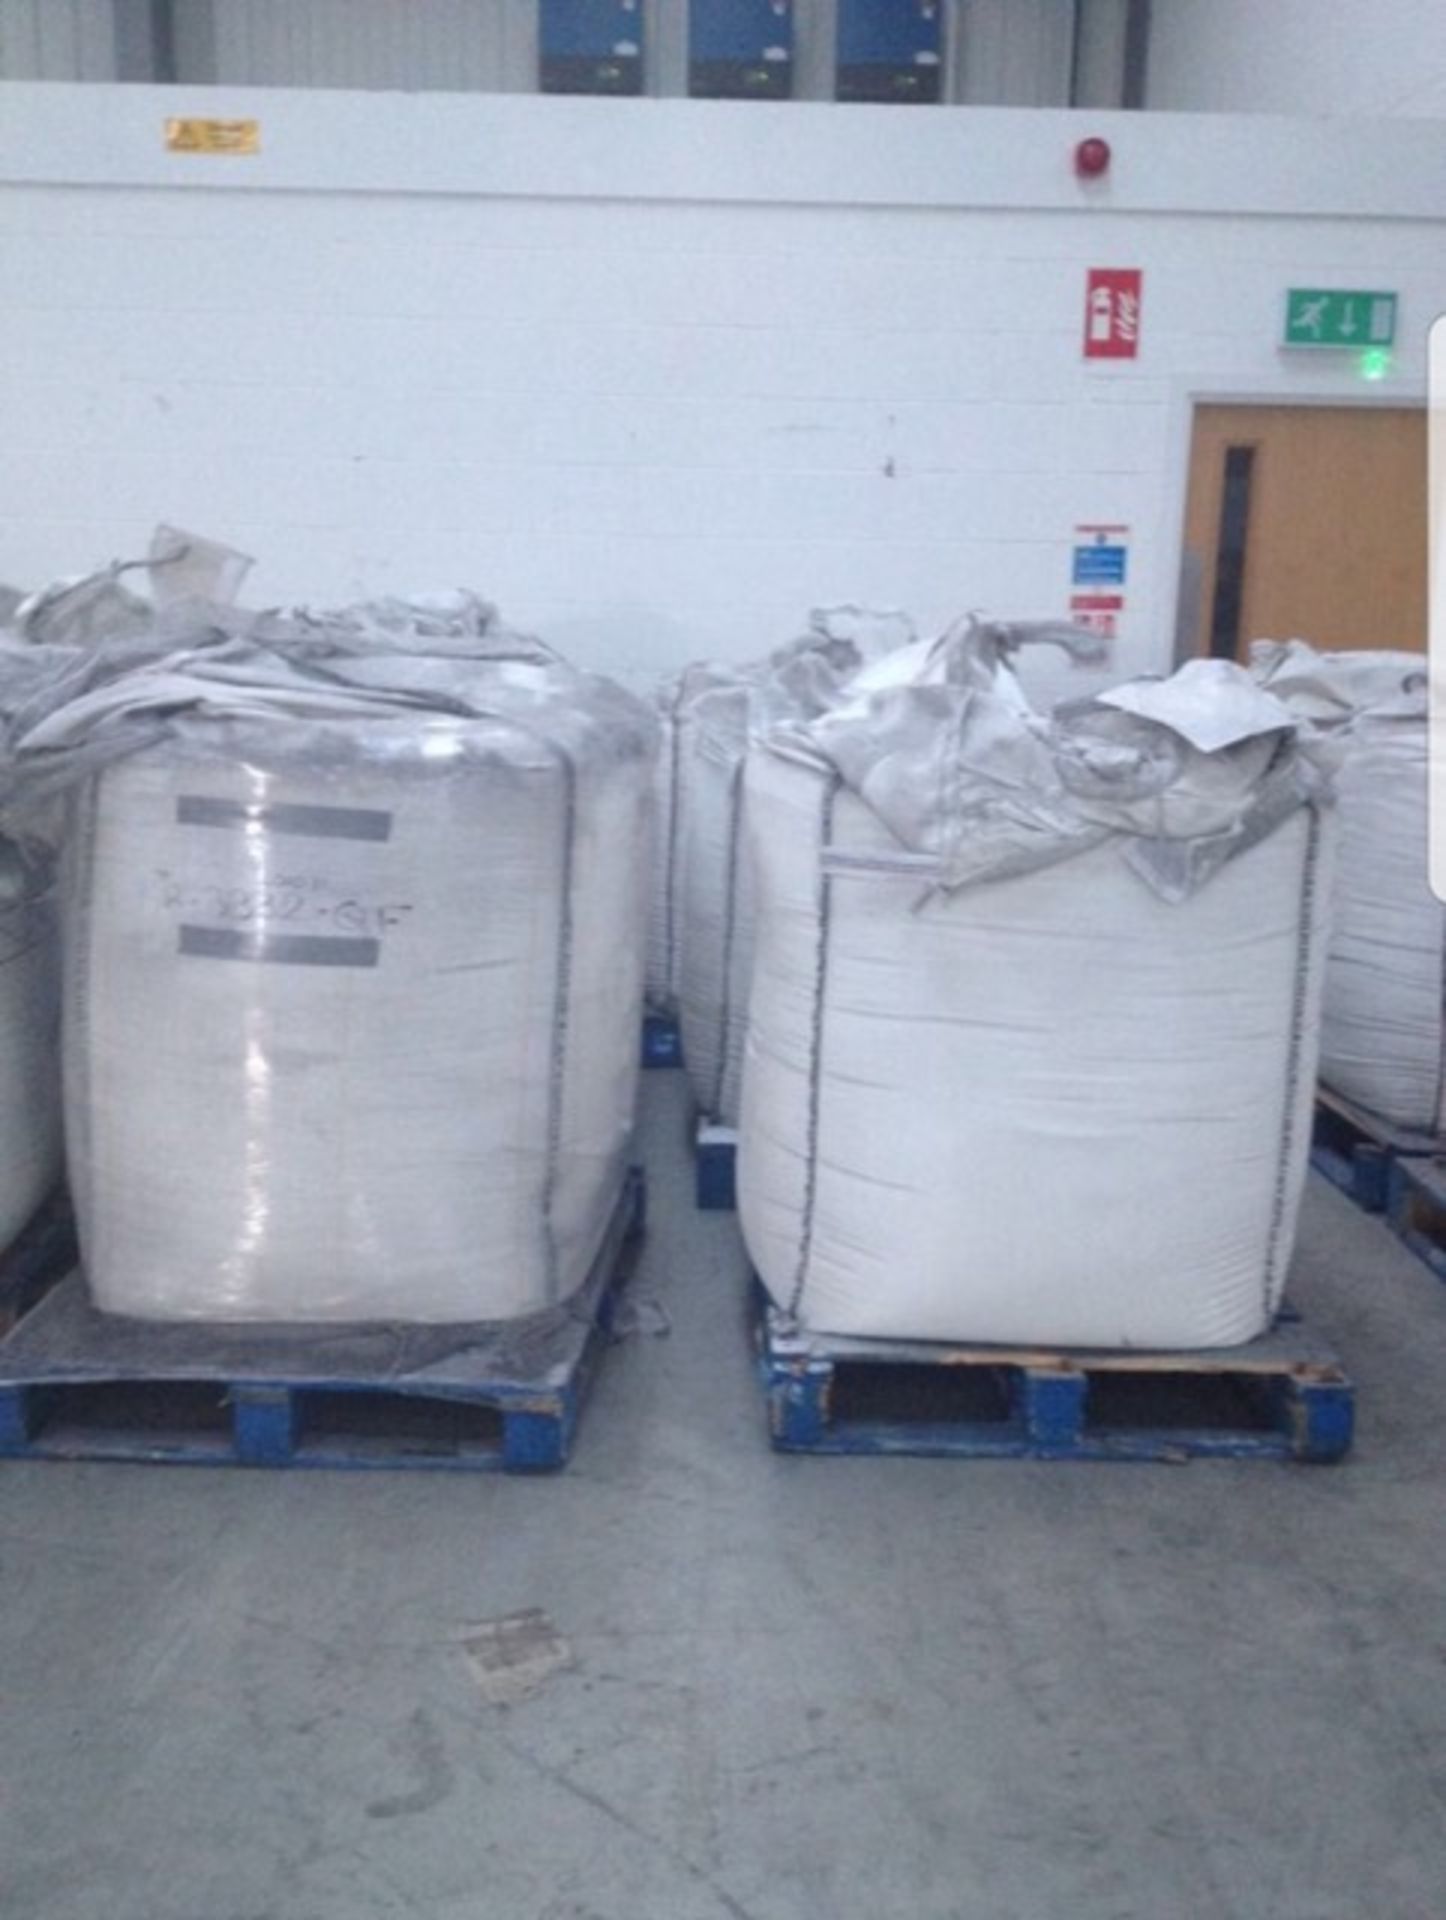 Pallet Of Approx. 1,000Kg - Luxury Branded Washing Powder. Approx. Retail Value £4,000. You Are